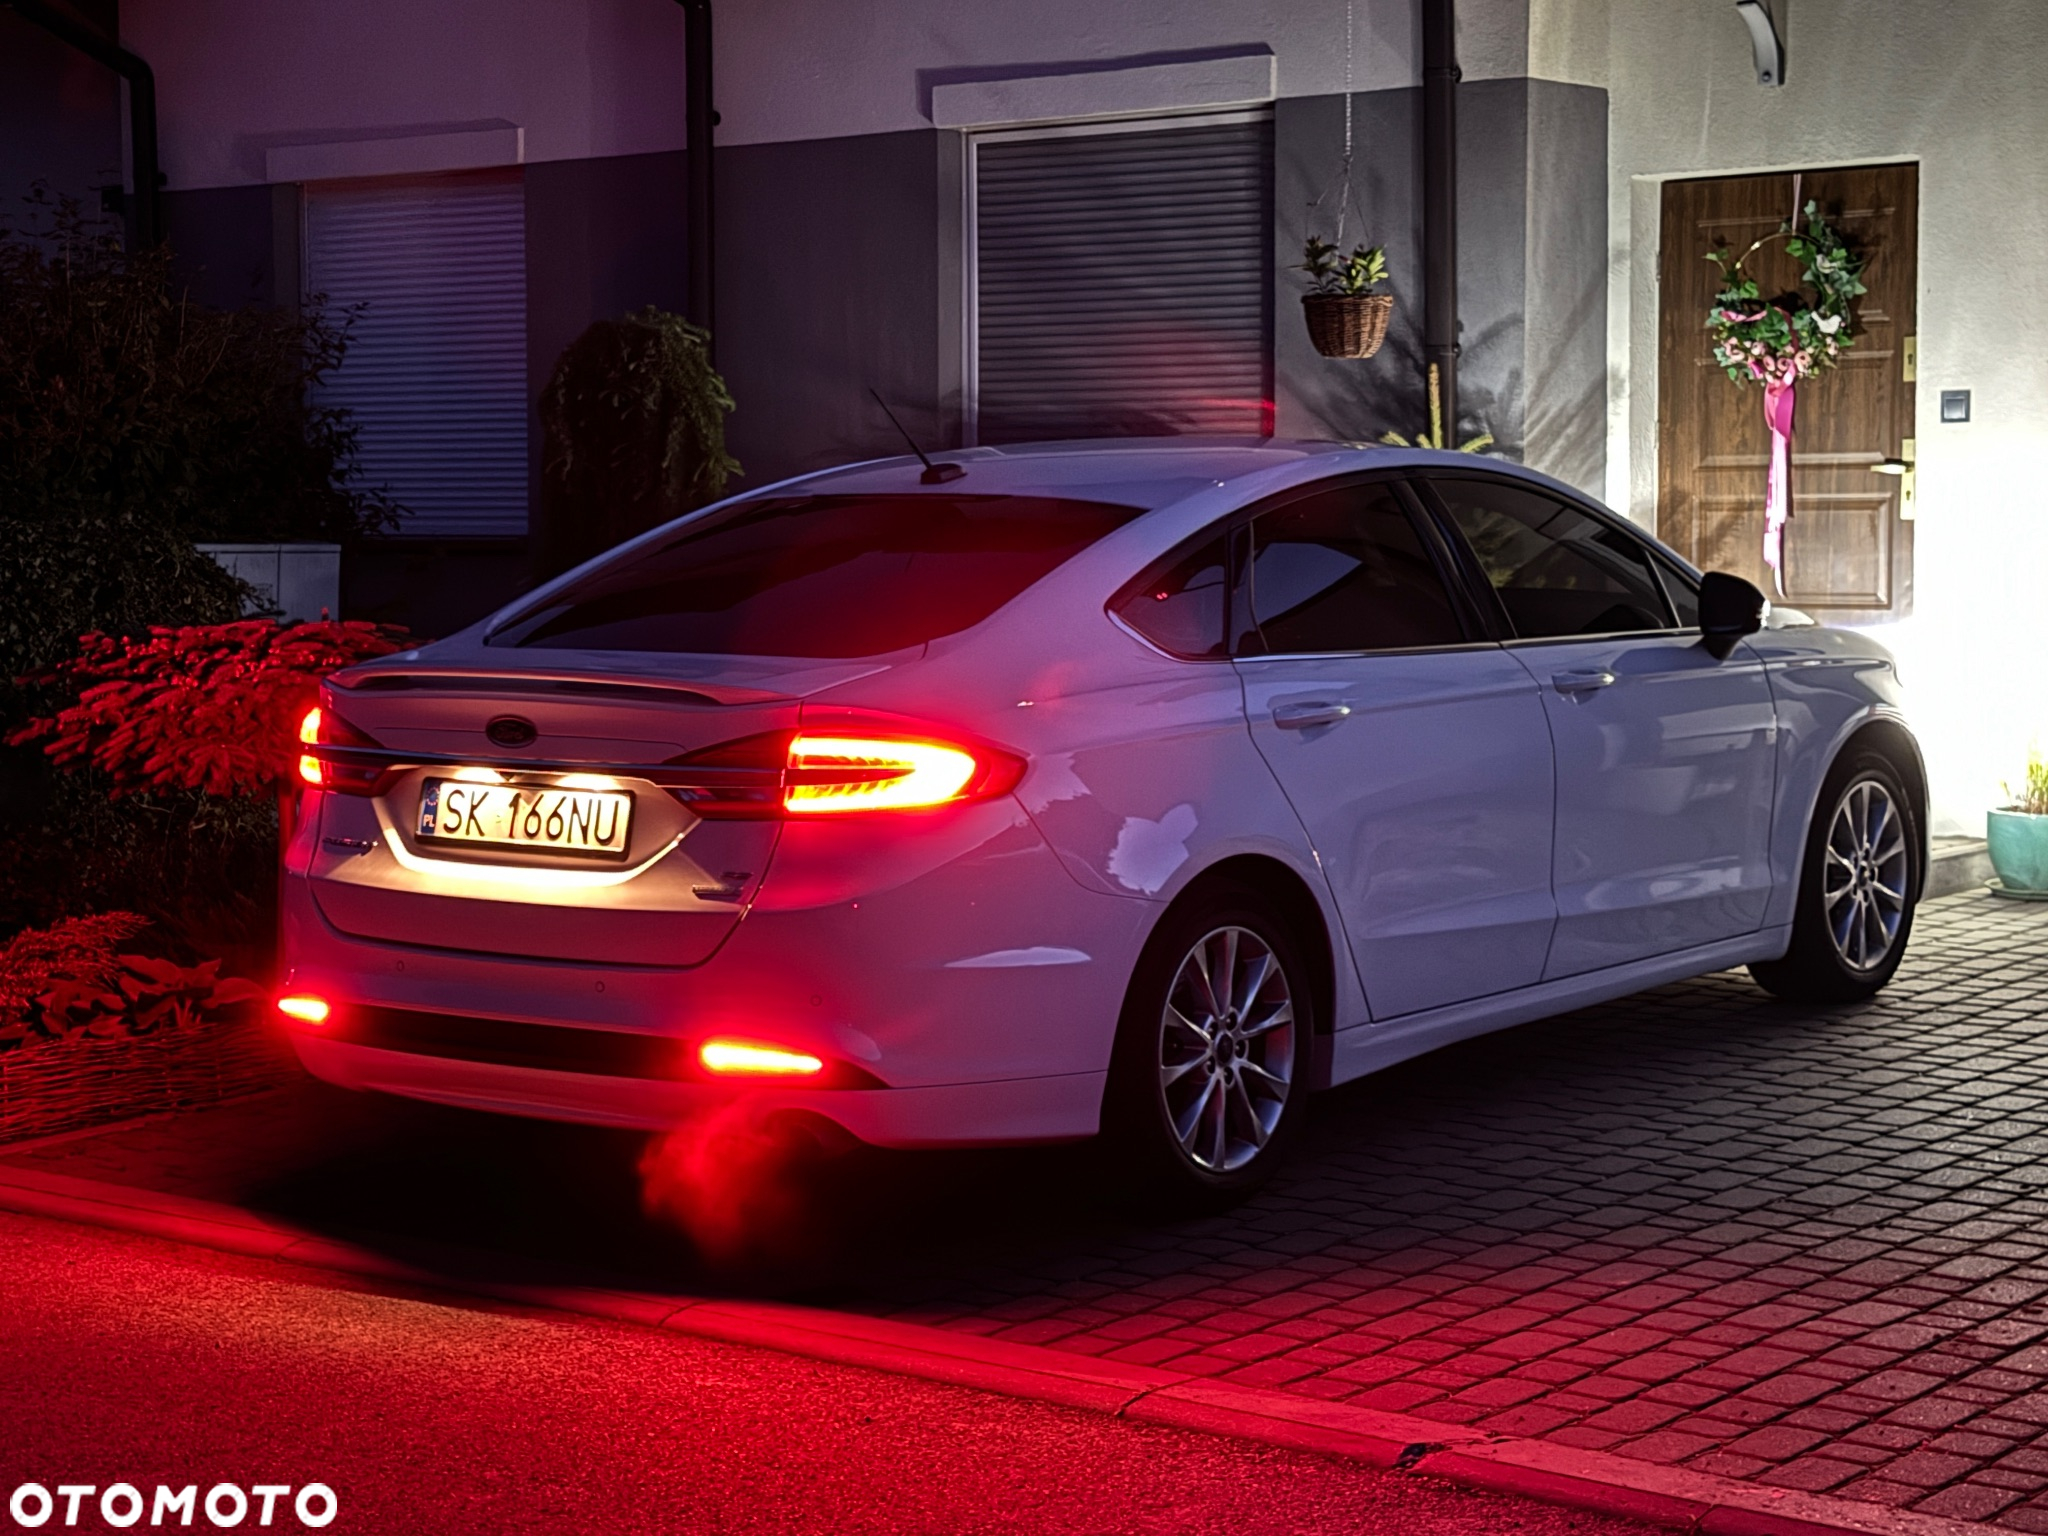 Ford Fusion - 5